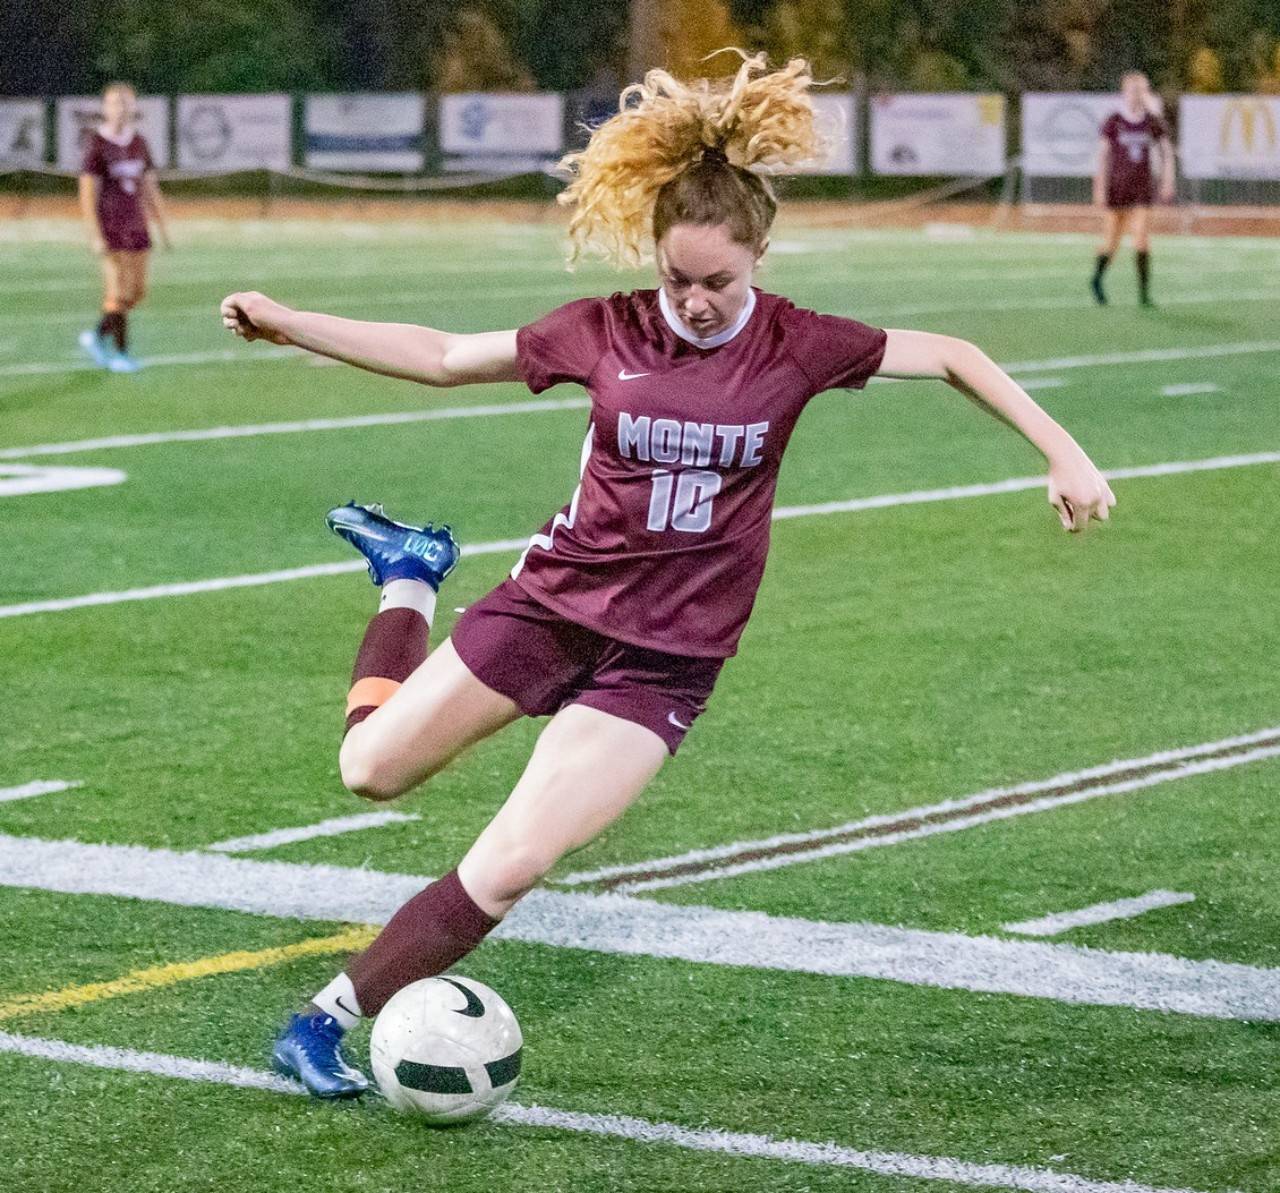 Montesano midfielder Brooke Streeter, seen here in a file photo from November, 2019, was named to the Washington State Soccer Coaches Association All-State First Team for the 1A classification last week. (Photo by Shawn Donnelly)